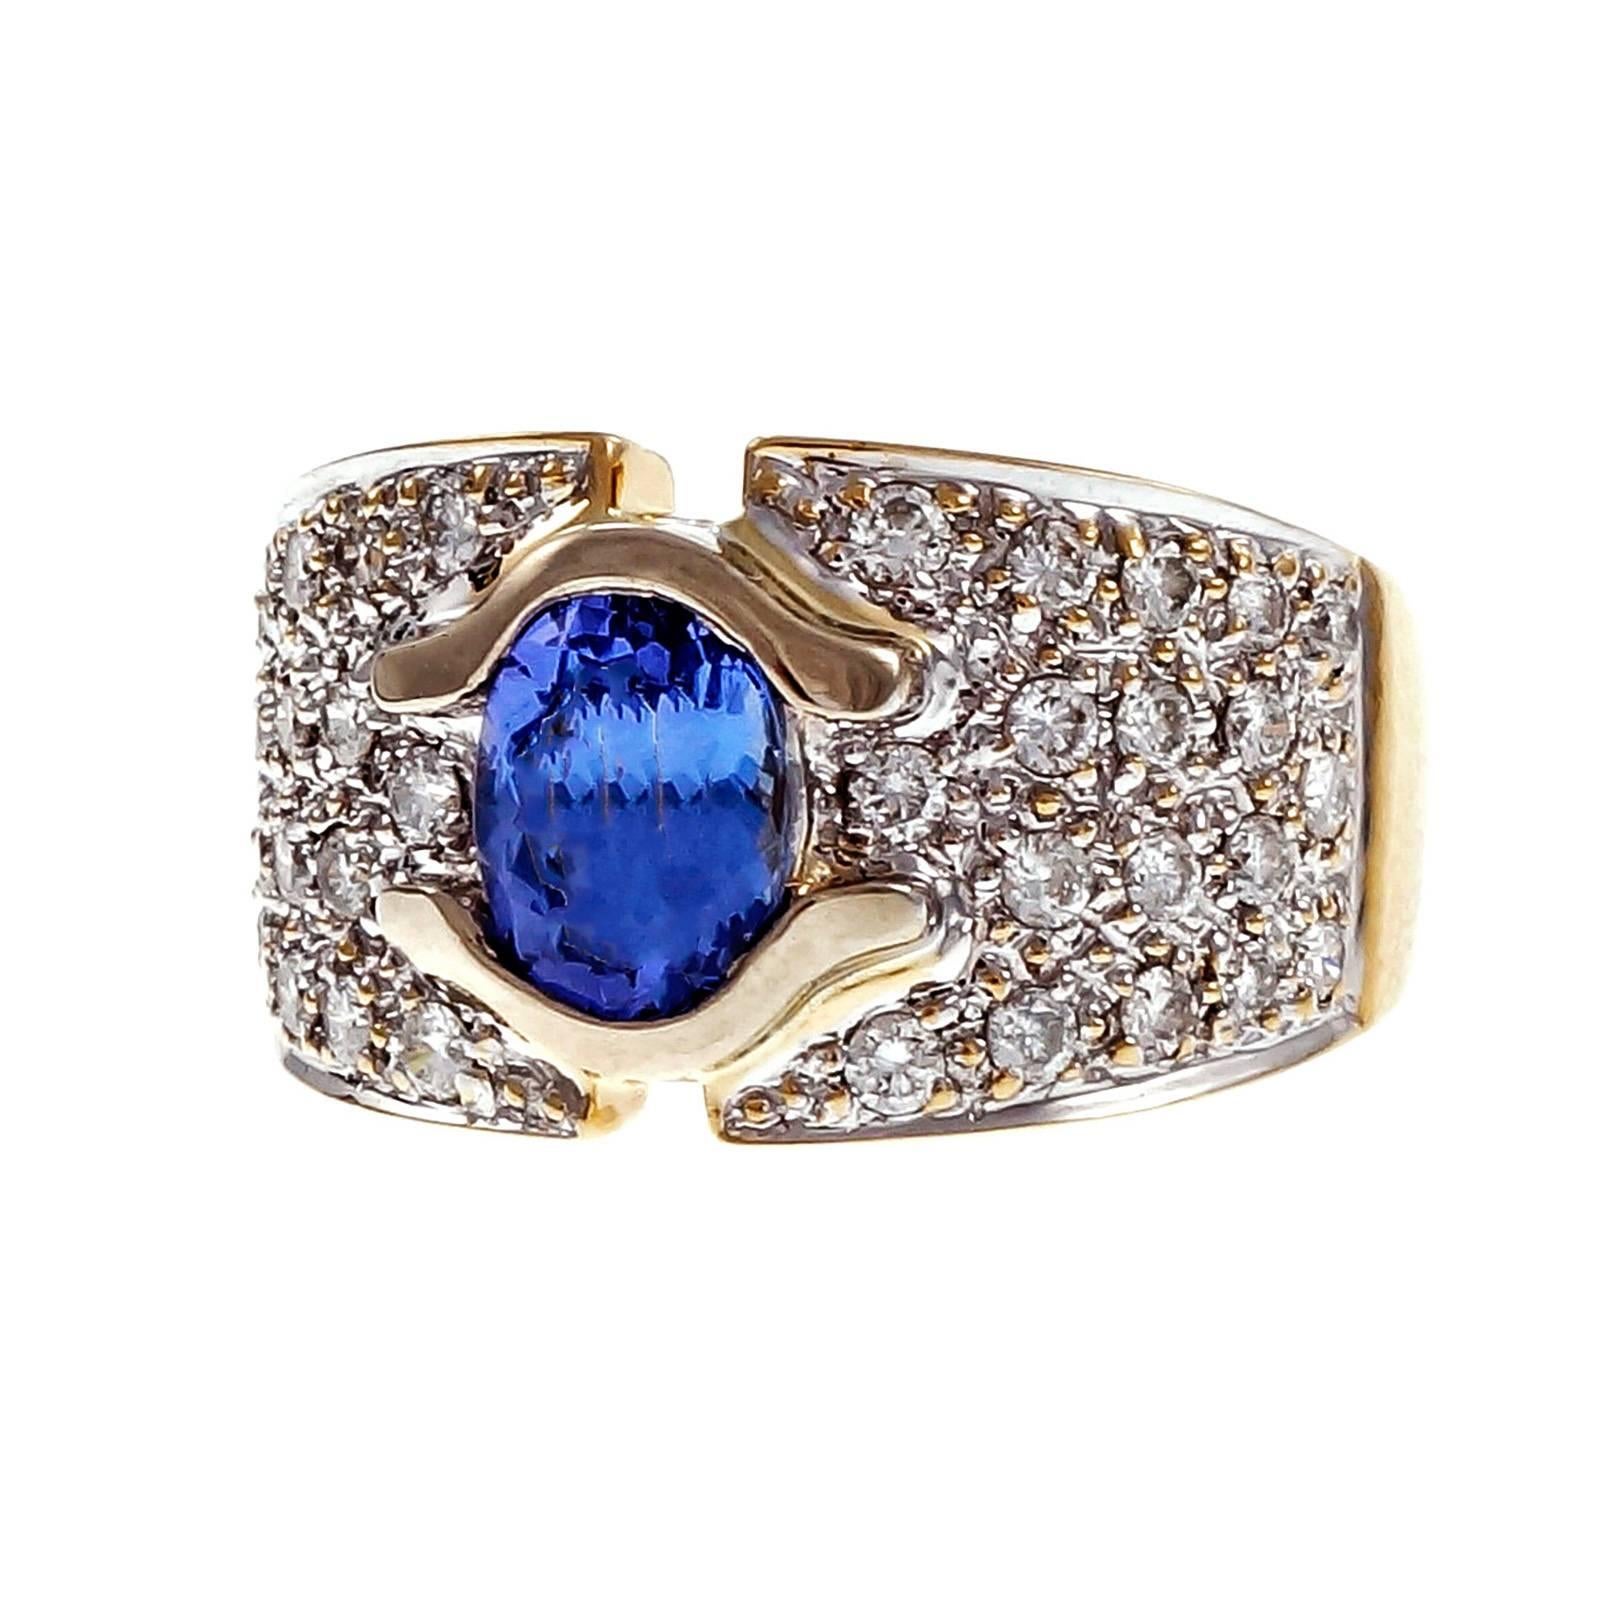 Tanzanite Pavé diamond 18k yellow gold ring. Sits low to the finger.

1 oval purple blue Tanzanite, approx. total weight 1.50cts, VS, 7.44 x 6.05mm
36 round diamonds, approx. total weight .72cts, H, VS – SI
18k yellow gold
Tested and stamped: